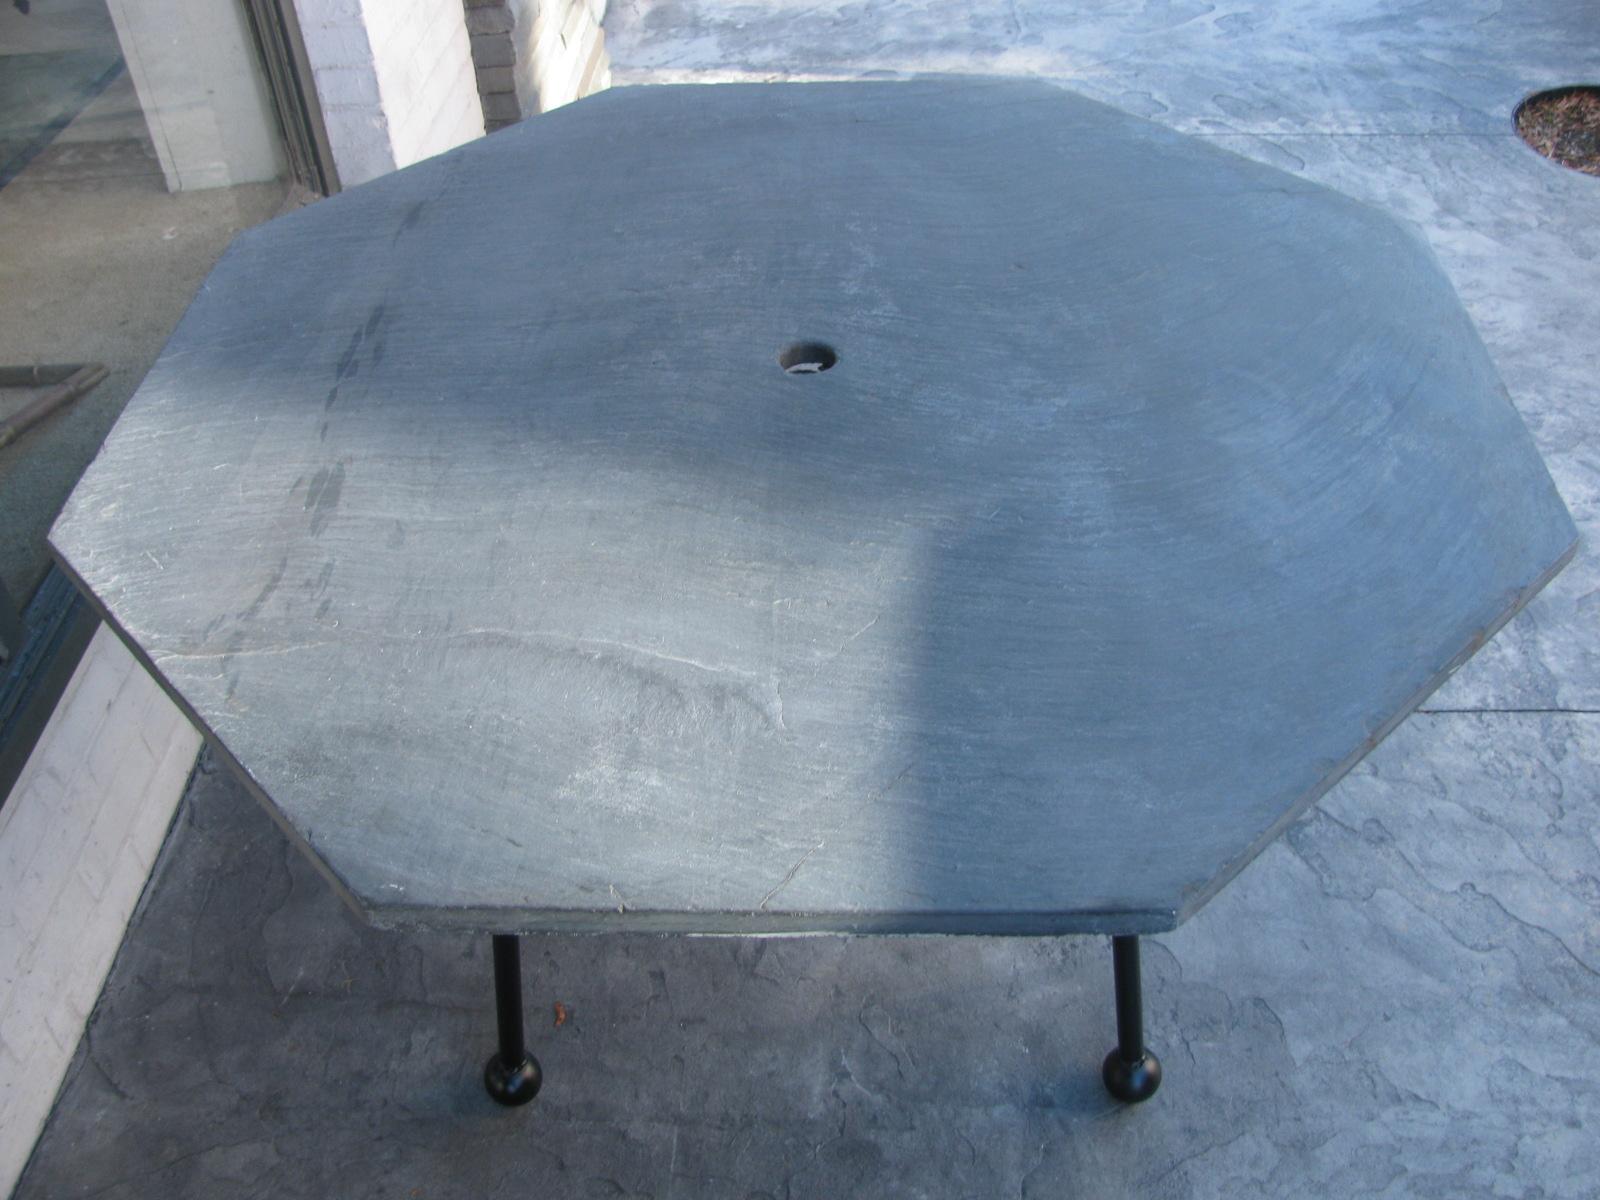 Fabulous octagonal slate top table by the Russell Woodard Co. Almost 1 inch thick with an umbrella hole cutout in the center. Wrought iron base with ball feet for support, was just recently painted black. Perfect for the patio outdoor area. All in